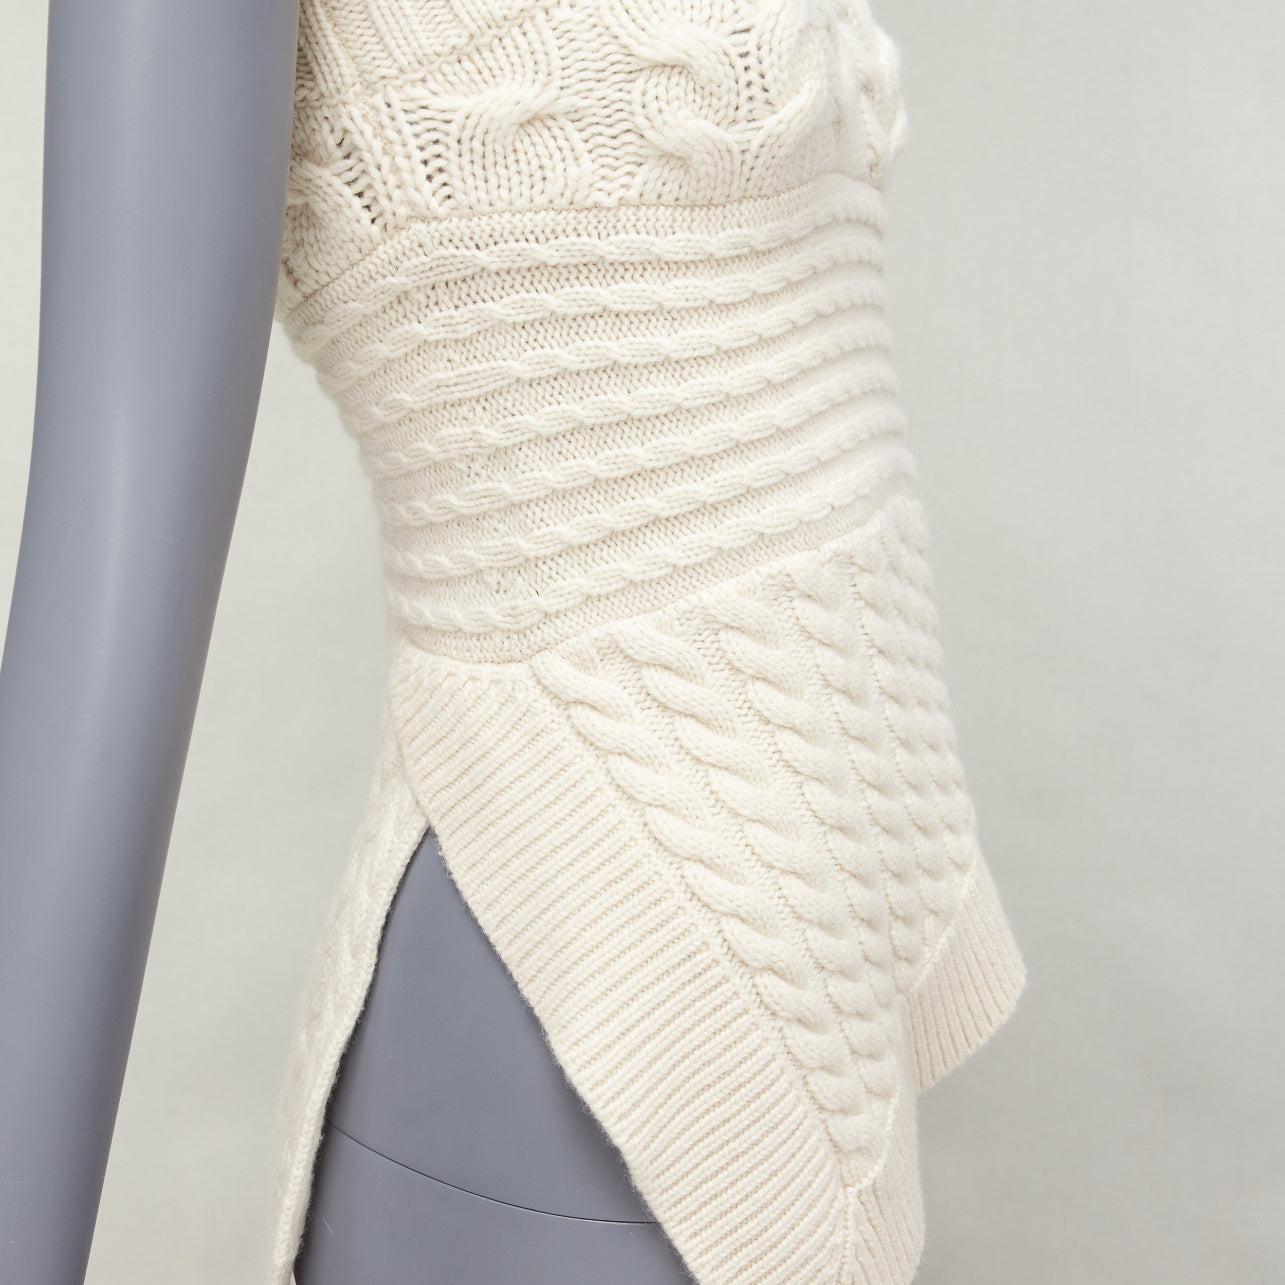 BURBERRY 100% cashmere cream one shoulder mixed cable knit pullover sweater XS
Reference: YIKK/A00059
Brand: Burberry
Material: 100% Cashmere
Color: Beige
Pattern: Solid
Closure: Pullover
Lining: Unlined
Extra Details: Burberry‚Äôs cashmere sweater